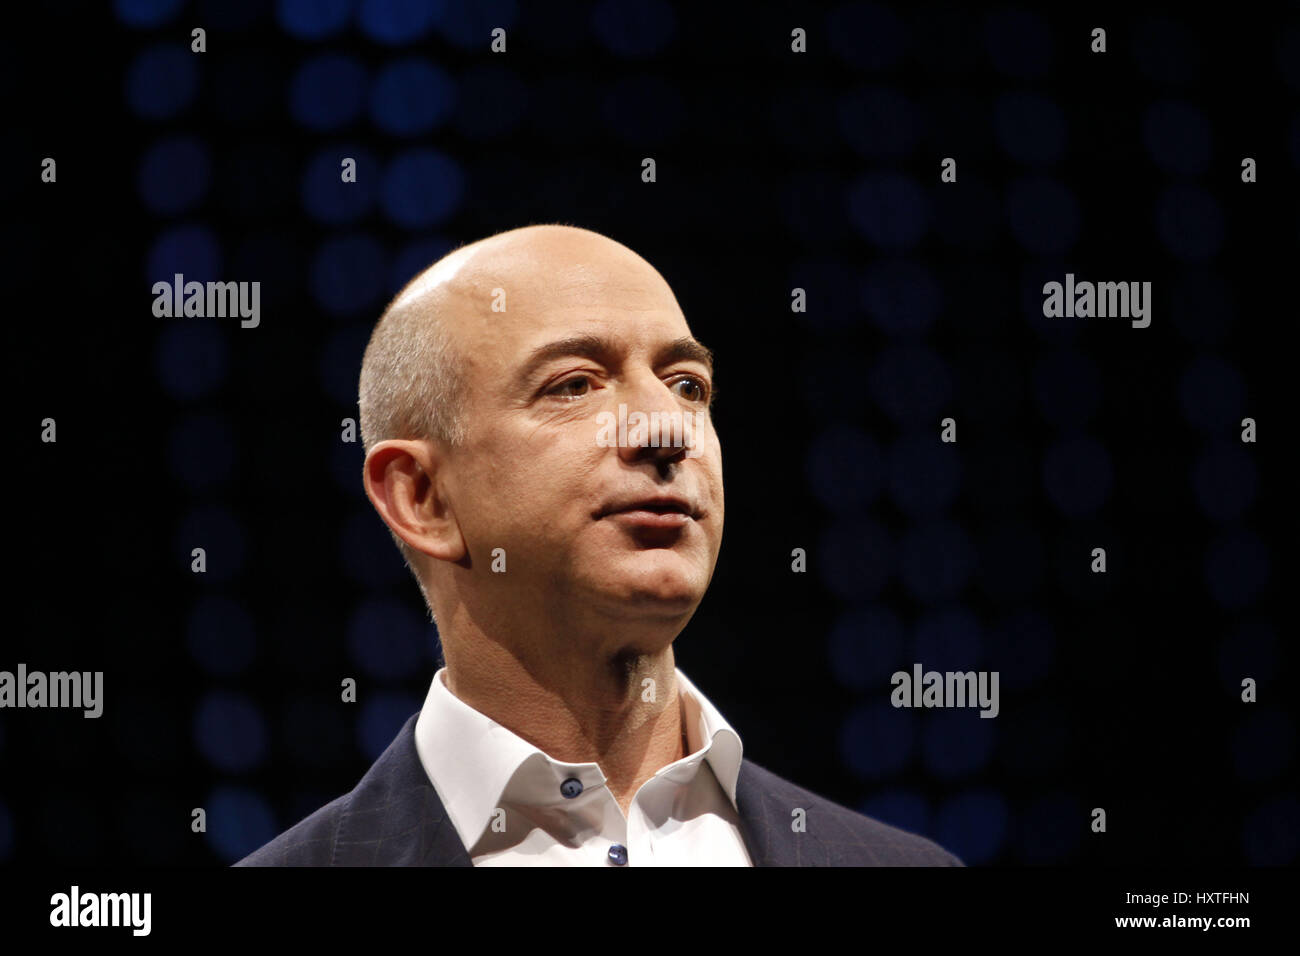 March 30, 2017 - FILE - JEFF BEZOS, Amazon (AMZN) founder and CEO, is now the second-richest person on the planet. Bezos' wealth climbed to $75.6 billion on Wednesday, according to the Bloomberg Billionaires Index. Helping Bezos get to the No. 2 perch: A rally in Amazon shares to a record. They closed up 2% at $874.32, lifting Amazon's market cap to $422 billion. Bezos owns nearly 17% of Amazon's shares, worth $70 billion, according to S&P Global Market Intelligence. Pictured: Sept. 6, 2012 - Santa Monica, California, U.S. - Jeff Bezos, chief executive officer of Amazon.com Inc., introduces ne Stock Photo